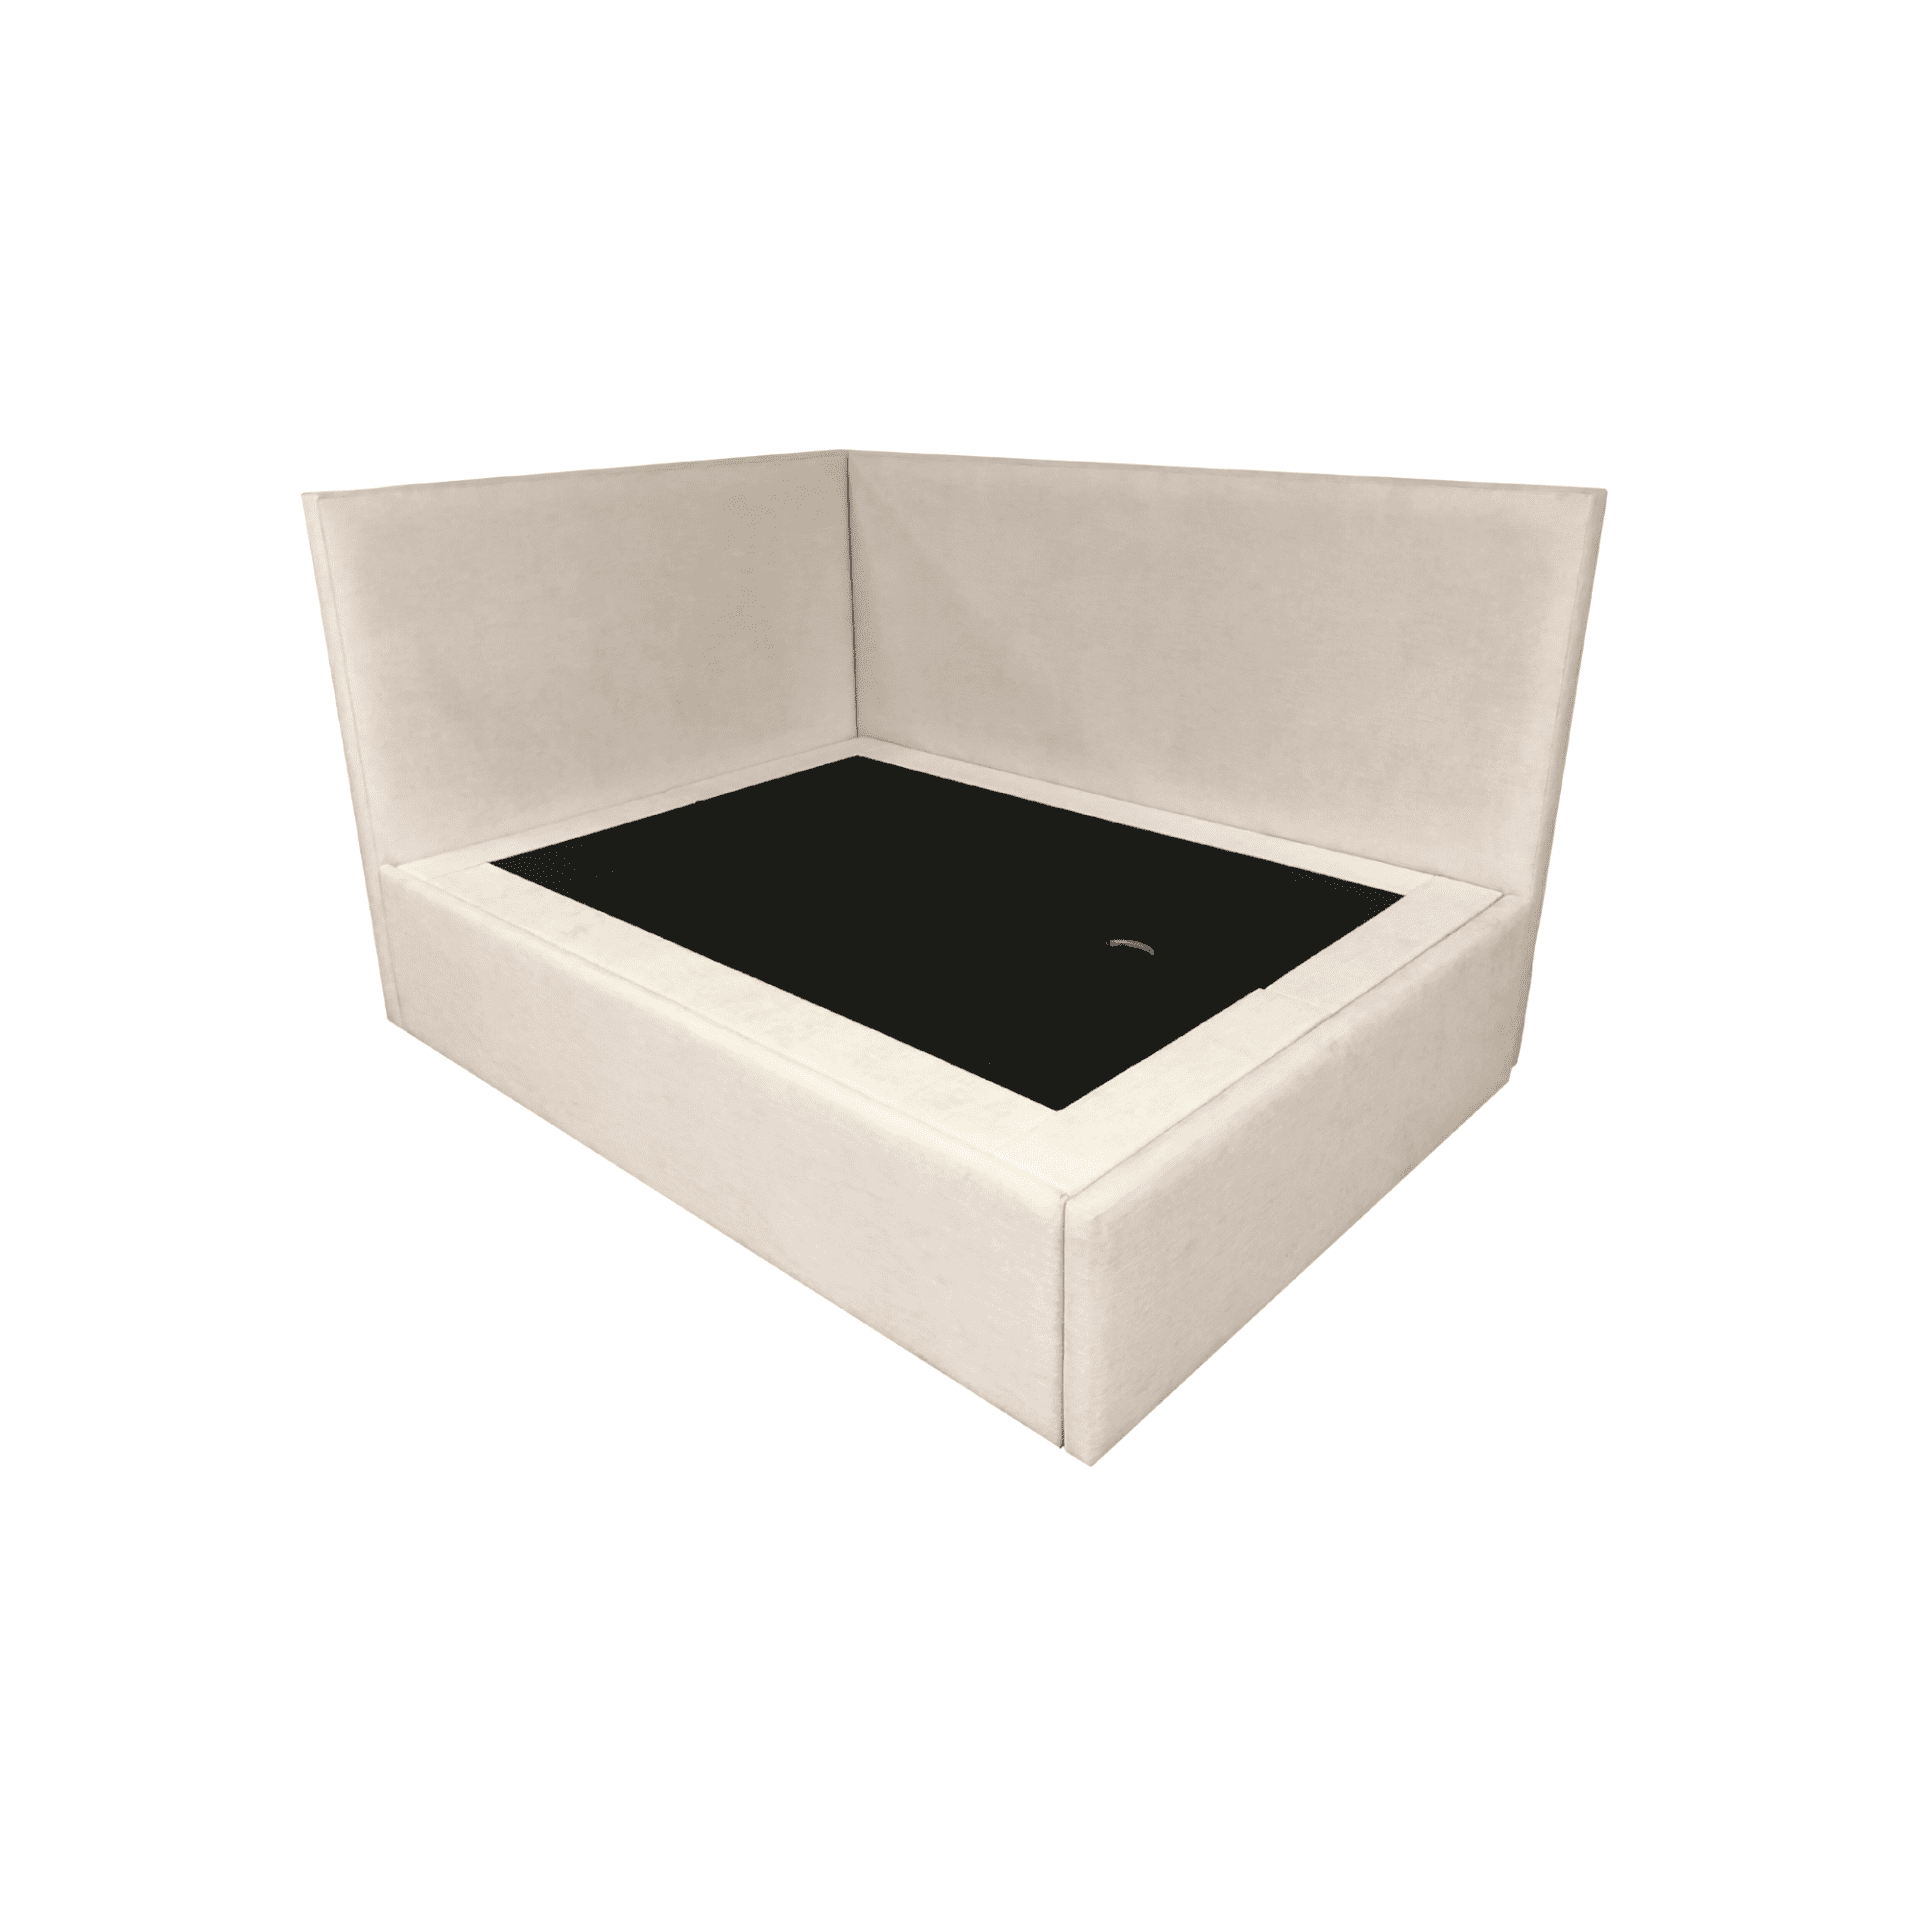 ADARA Upholstered Daybed, Luxury Furniture - Blend Home Furnishings